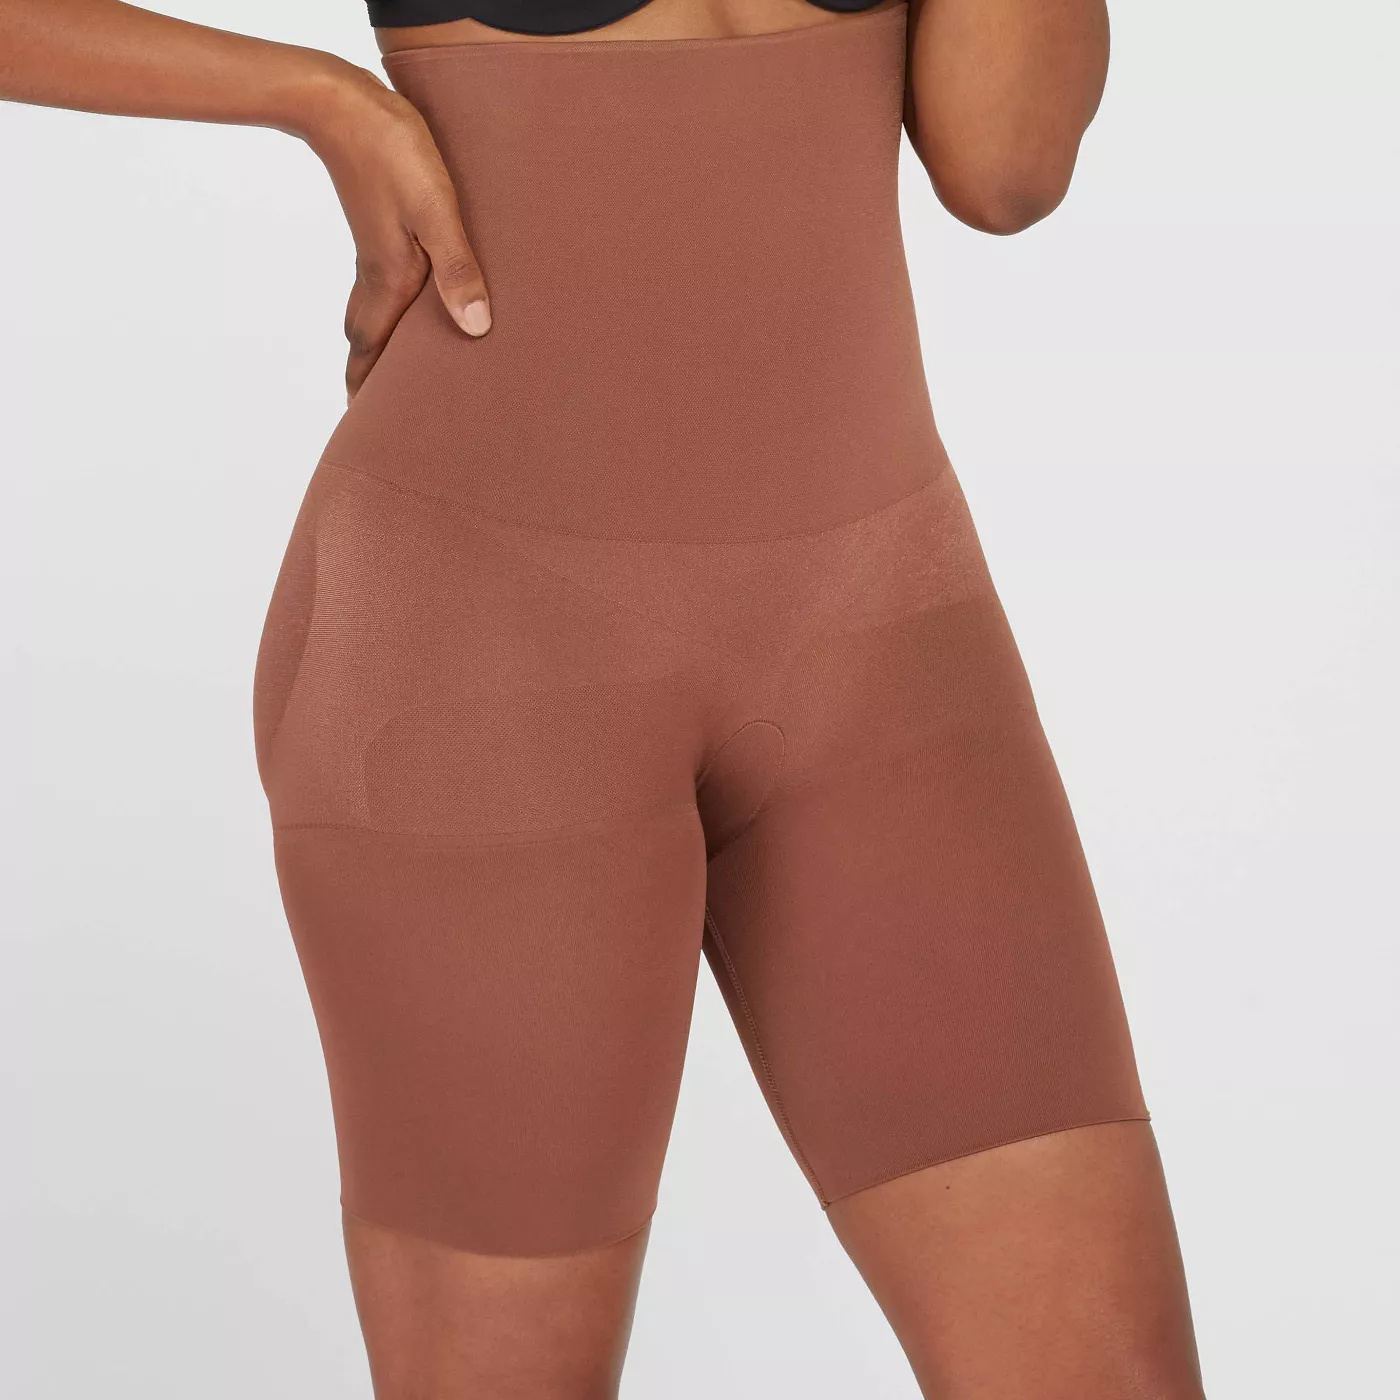 ASSETS by SPANX Women's Remarkable Results High-Waist Mid-Thigh Shaper - image 1 of 4